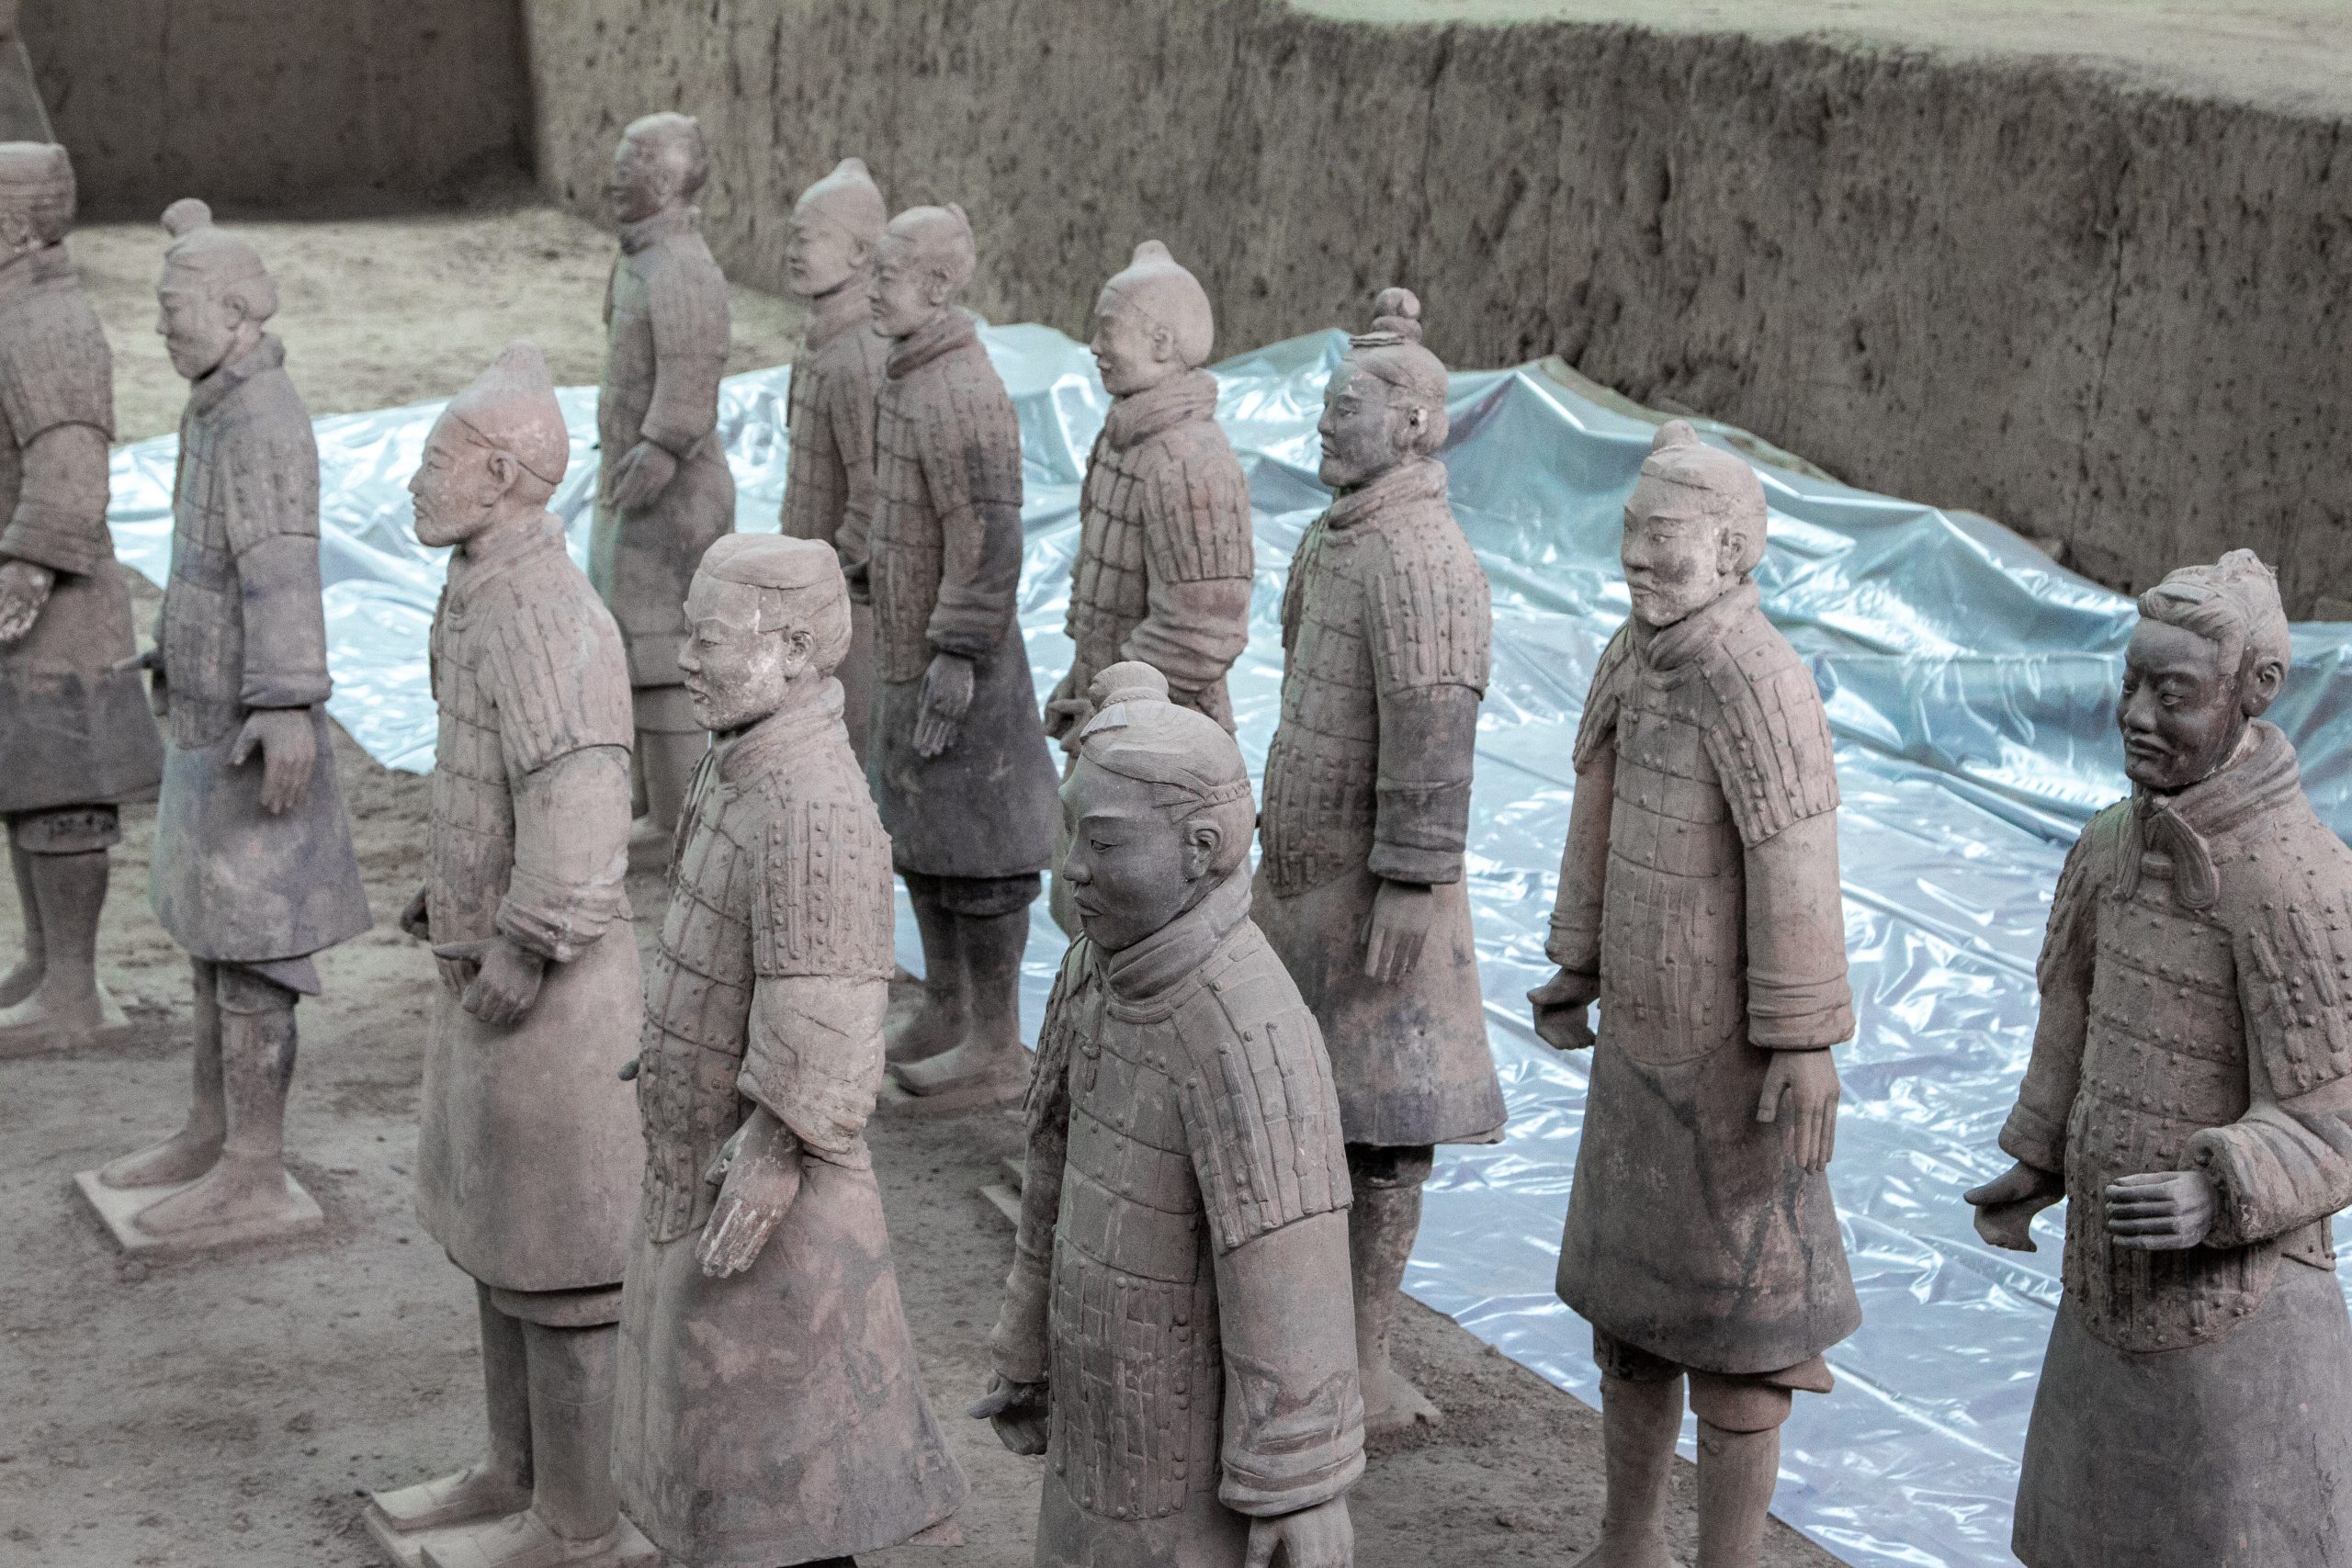 Terra Cotta Soldiers in China